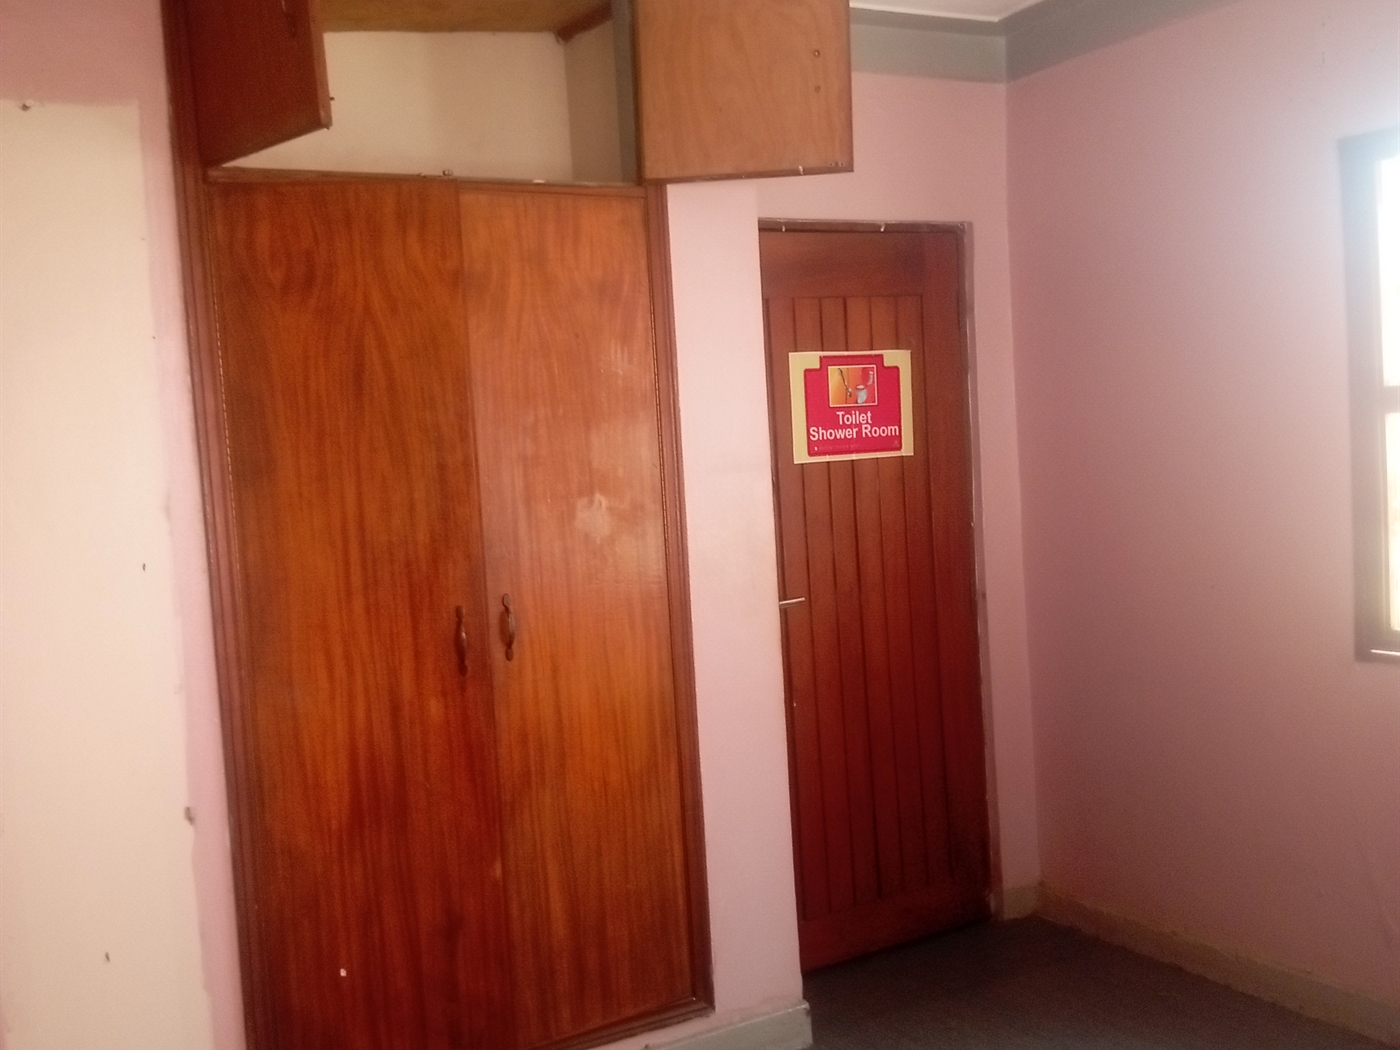 Office Space for rent in Mulago Kampala